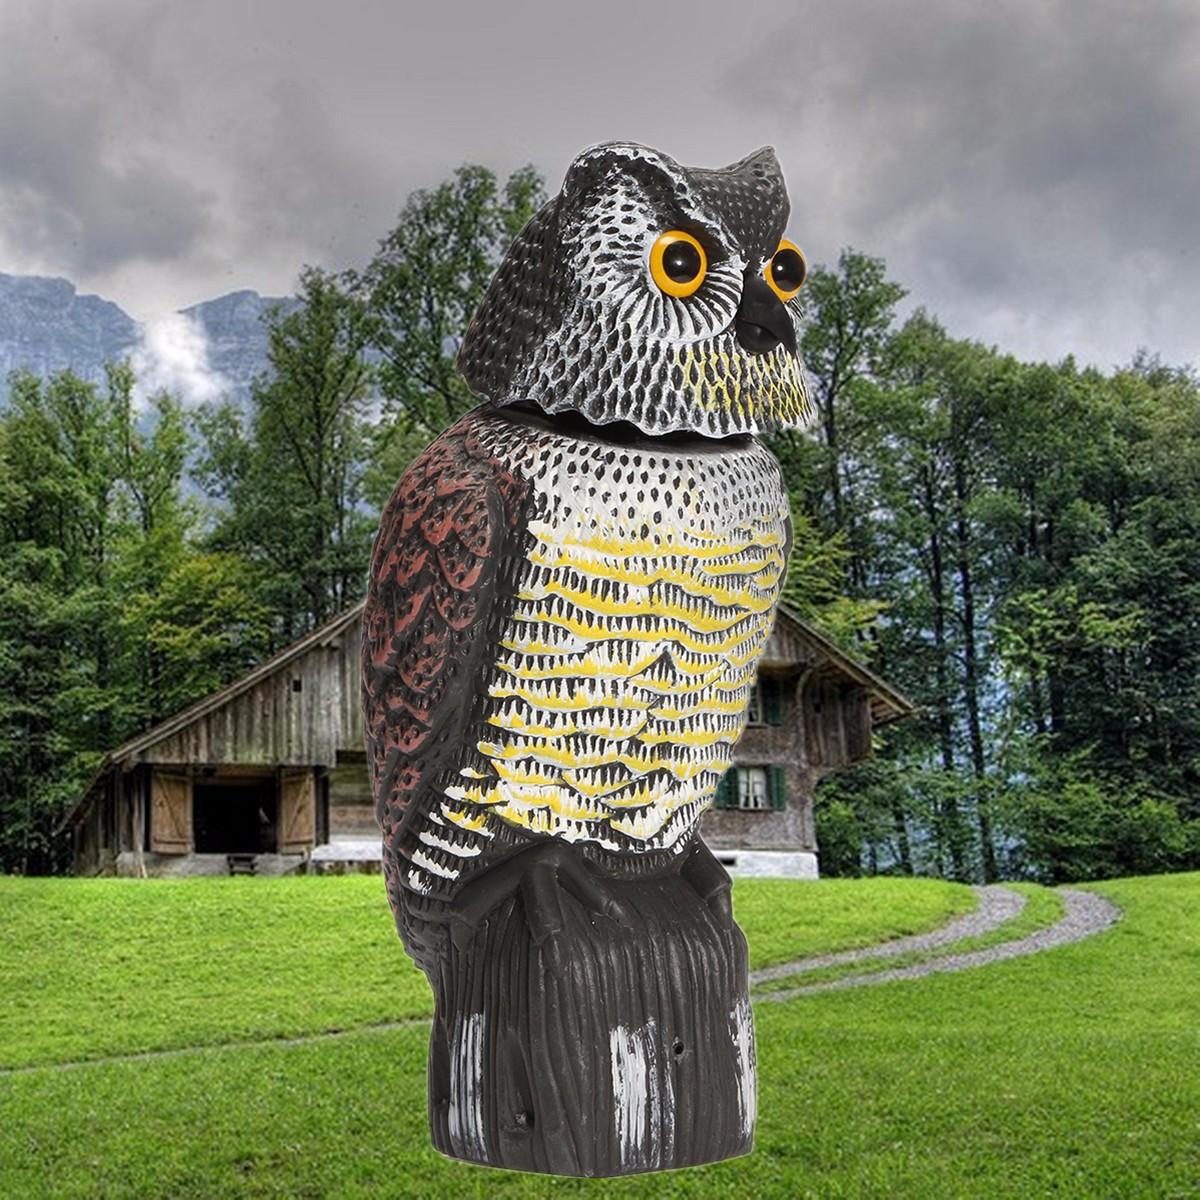 Artificial Resin Owl with Rotating Head Garden Yard Landscape Ornament Outdoor Hunting Decoy